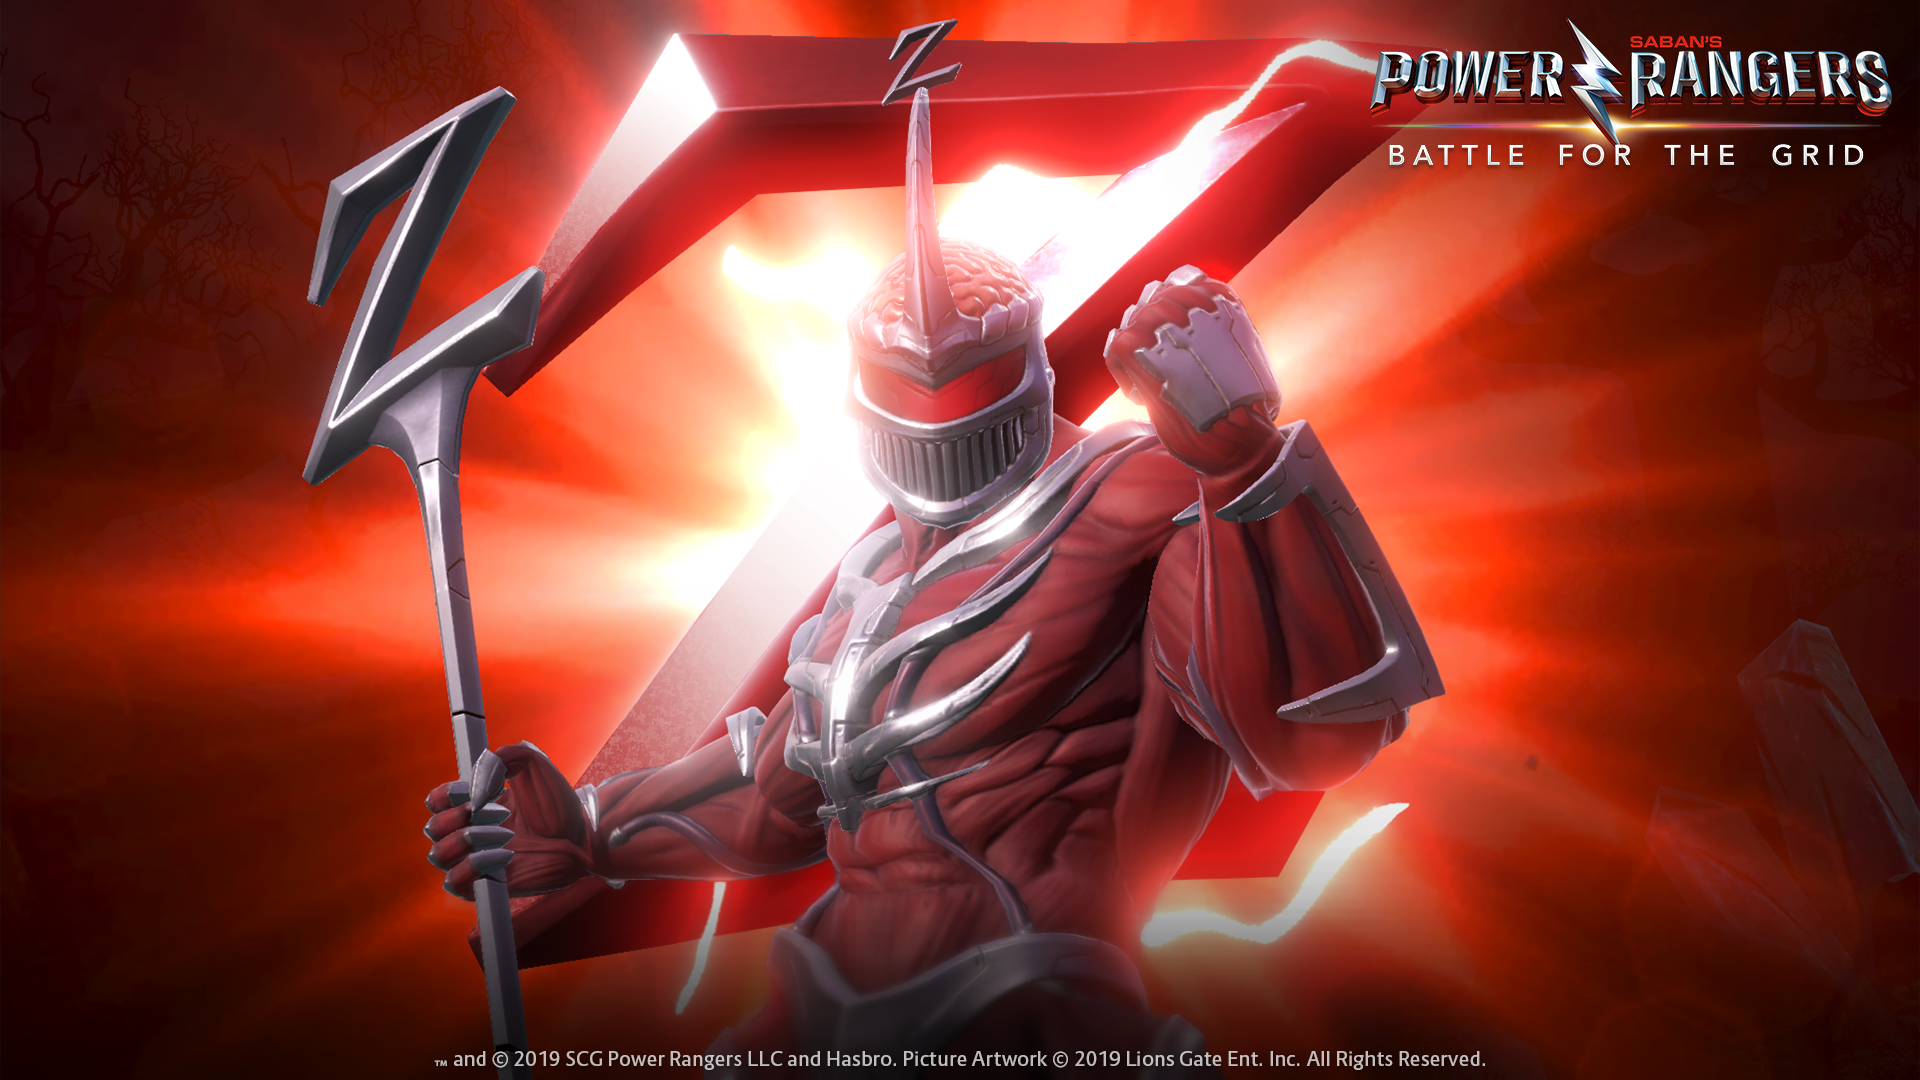 Power Rangers: Battle for the Grid version 1.4 now live; Play as Lord Zedd today